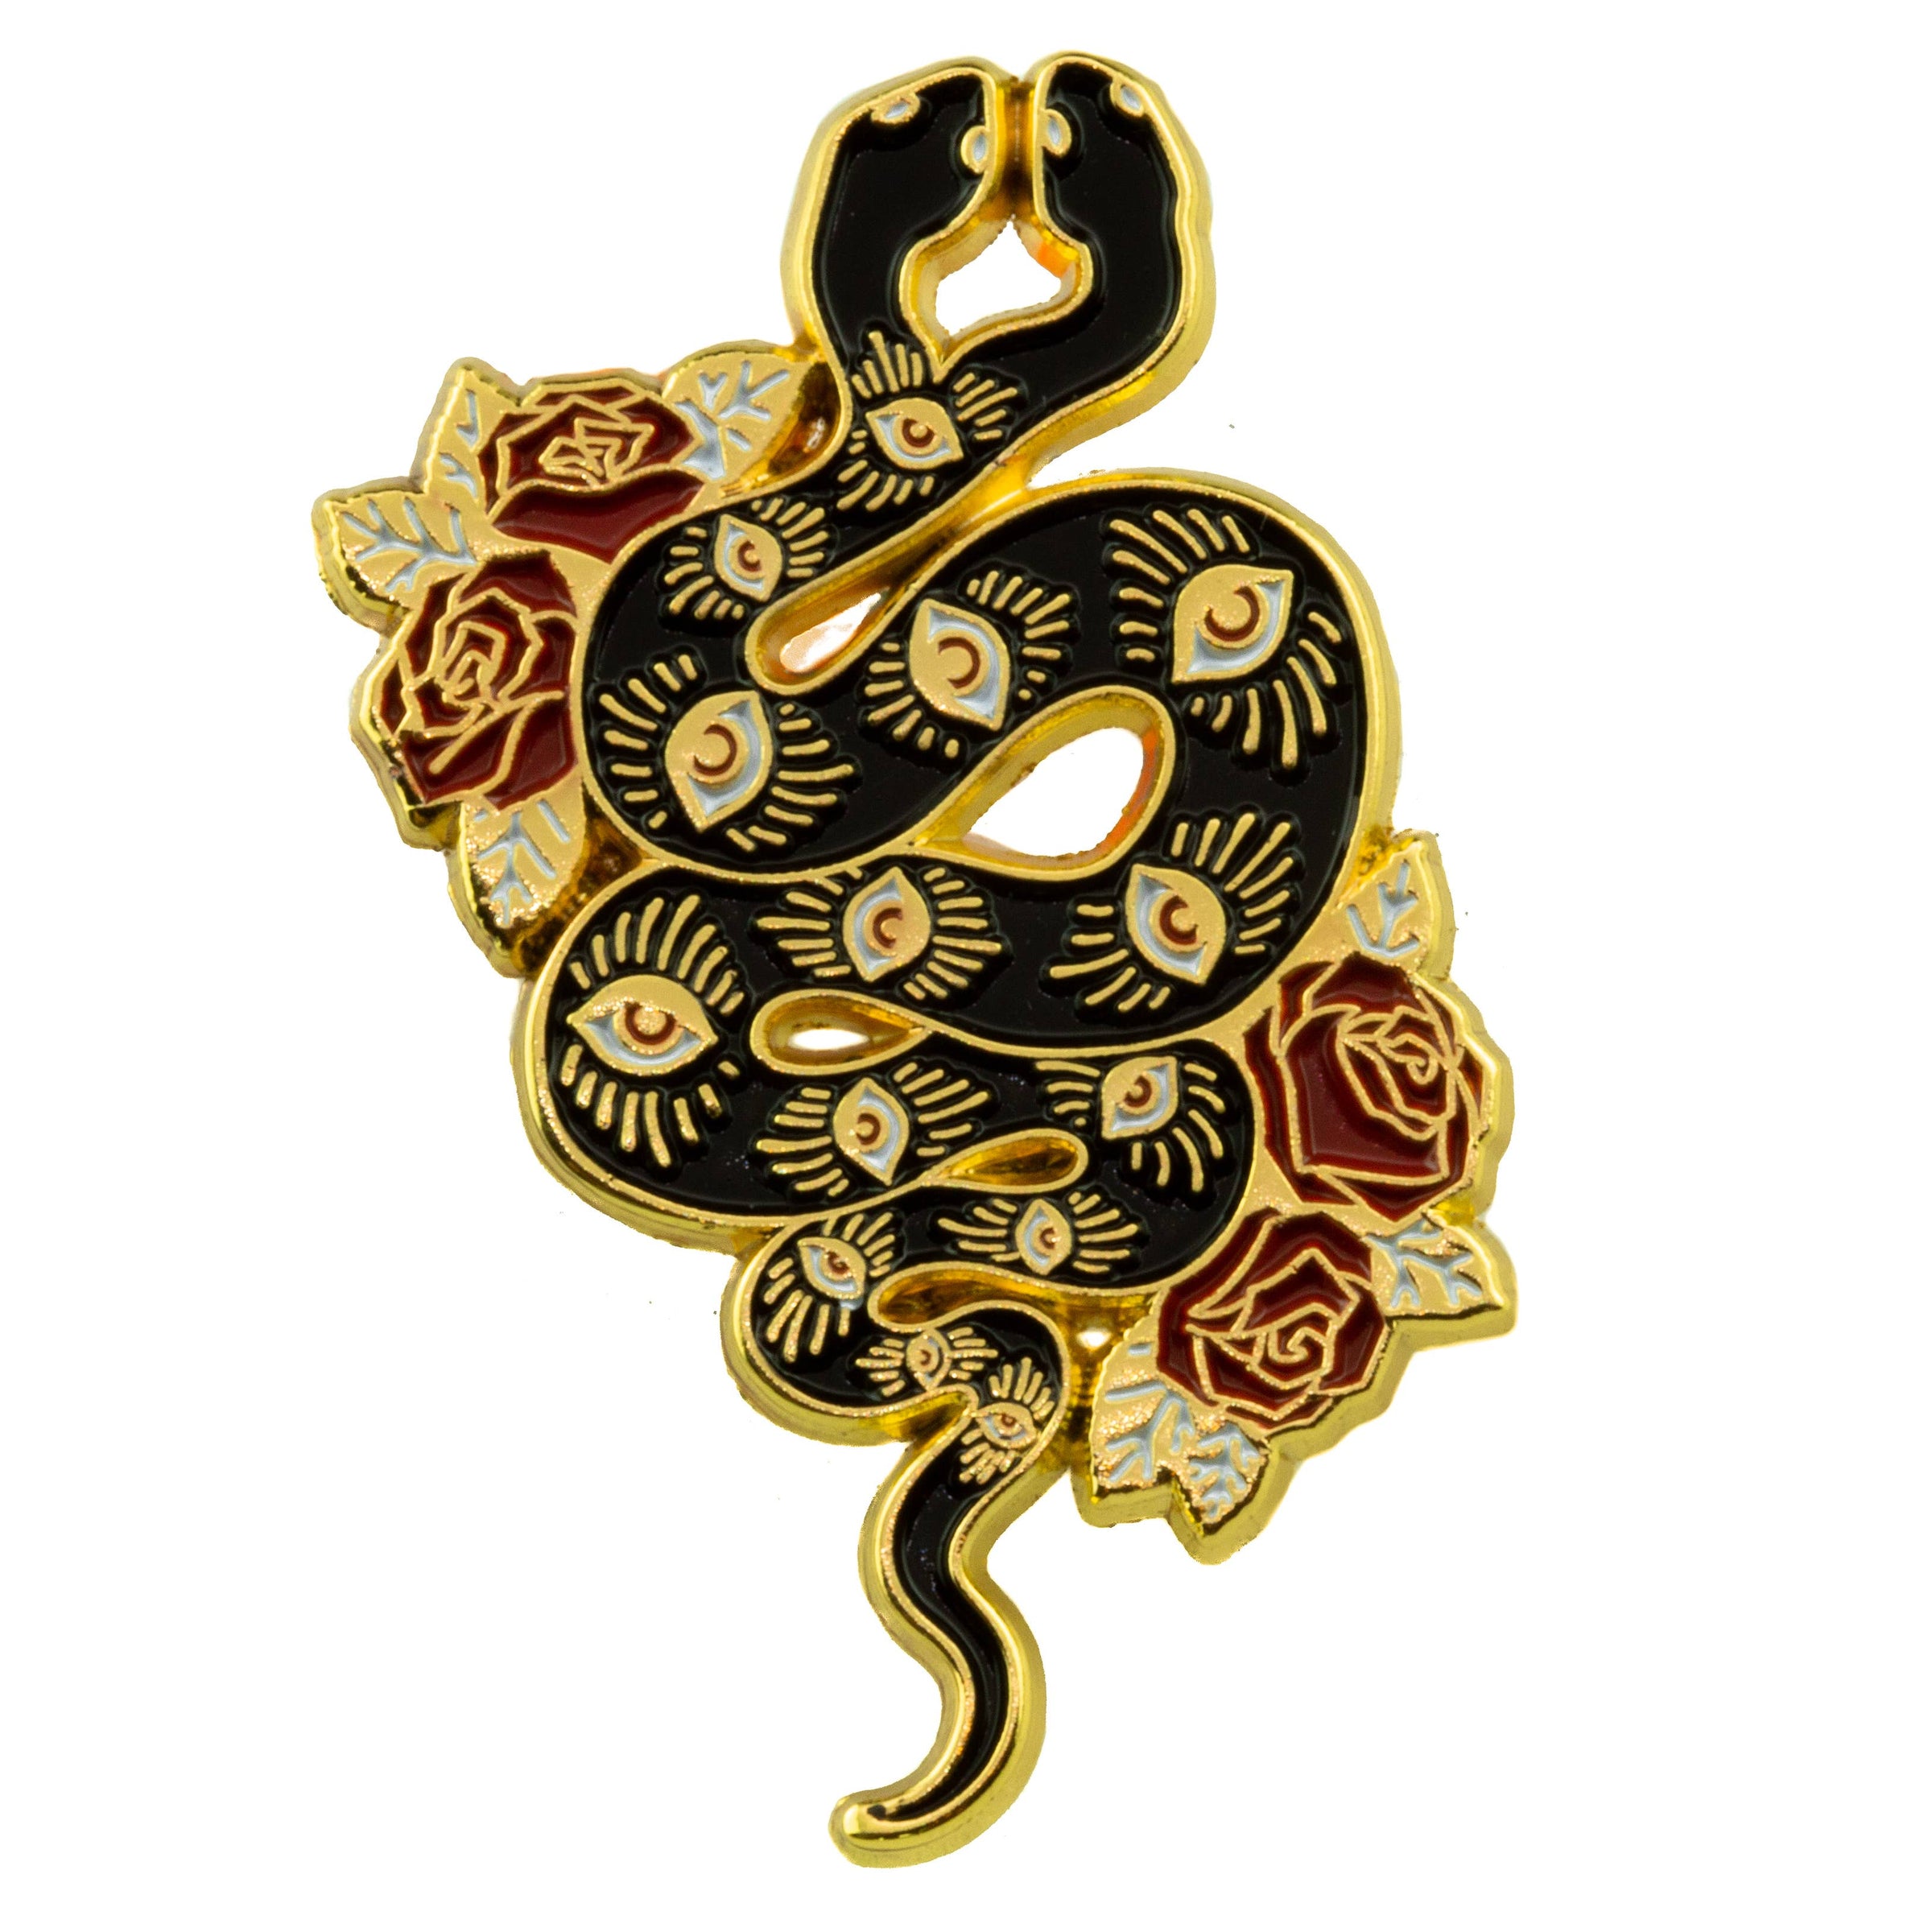 Yinder 40 Pieces Cute Gold Black Pins Set Vintage Butterfly Cat Snake Bug  Lapel Pins Christmas